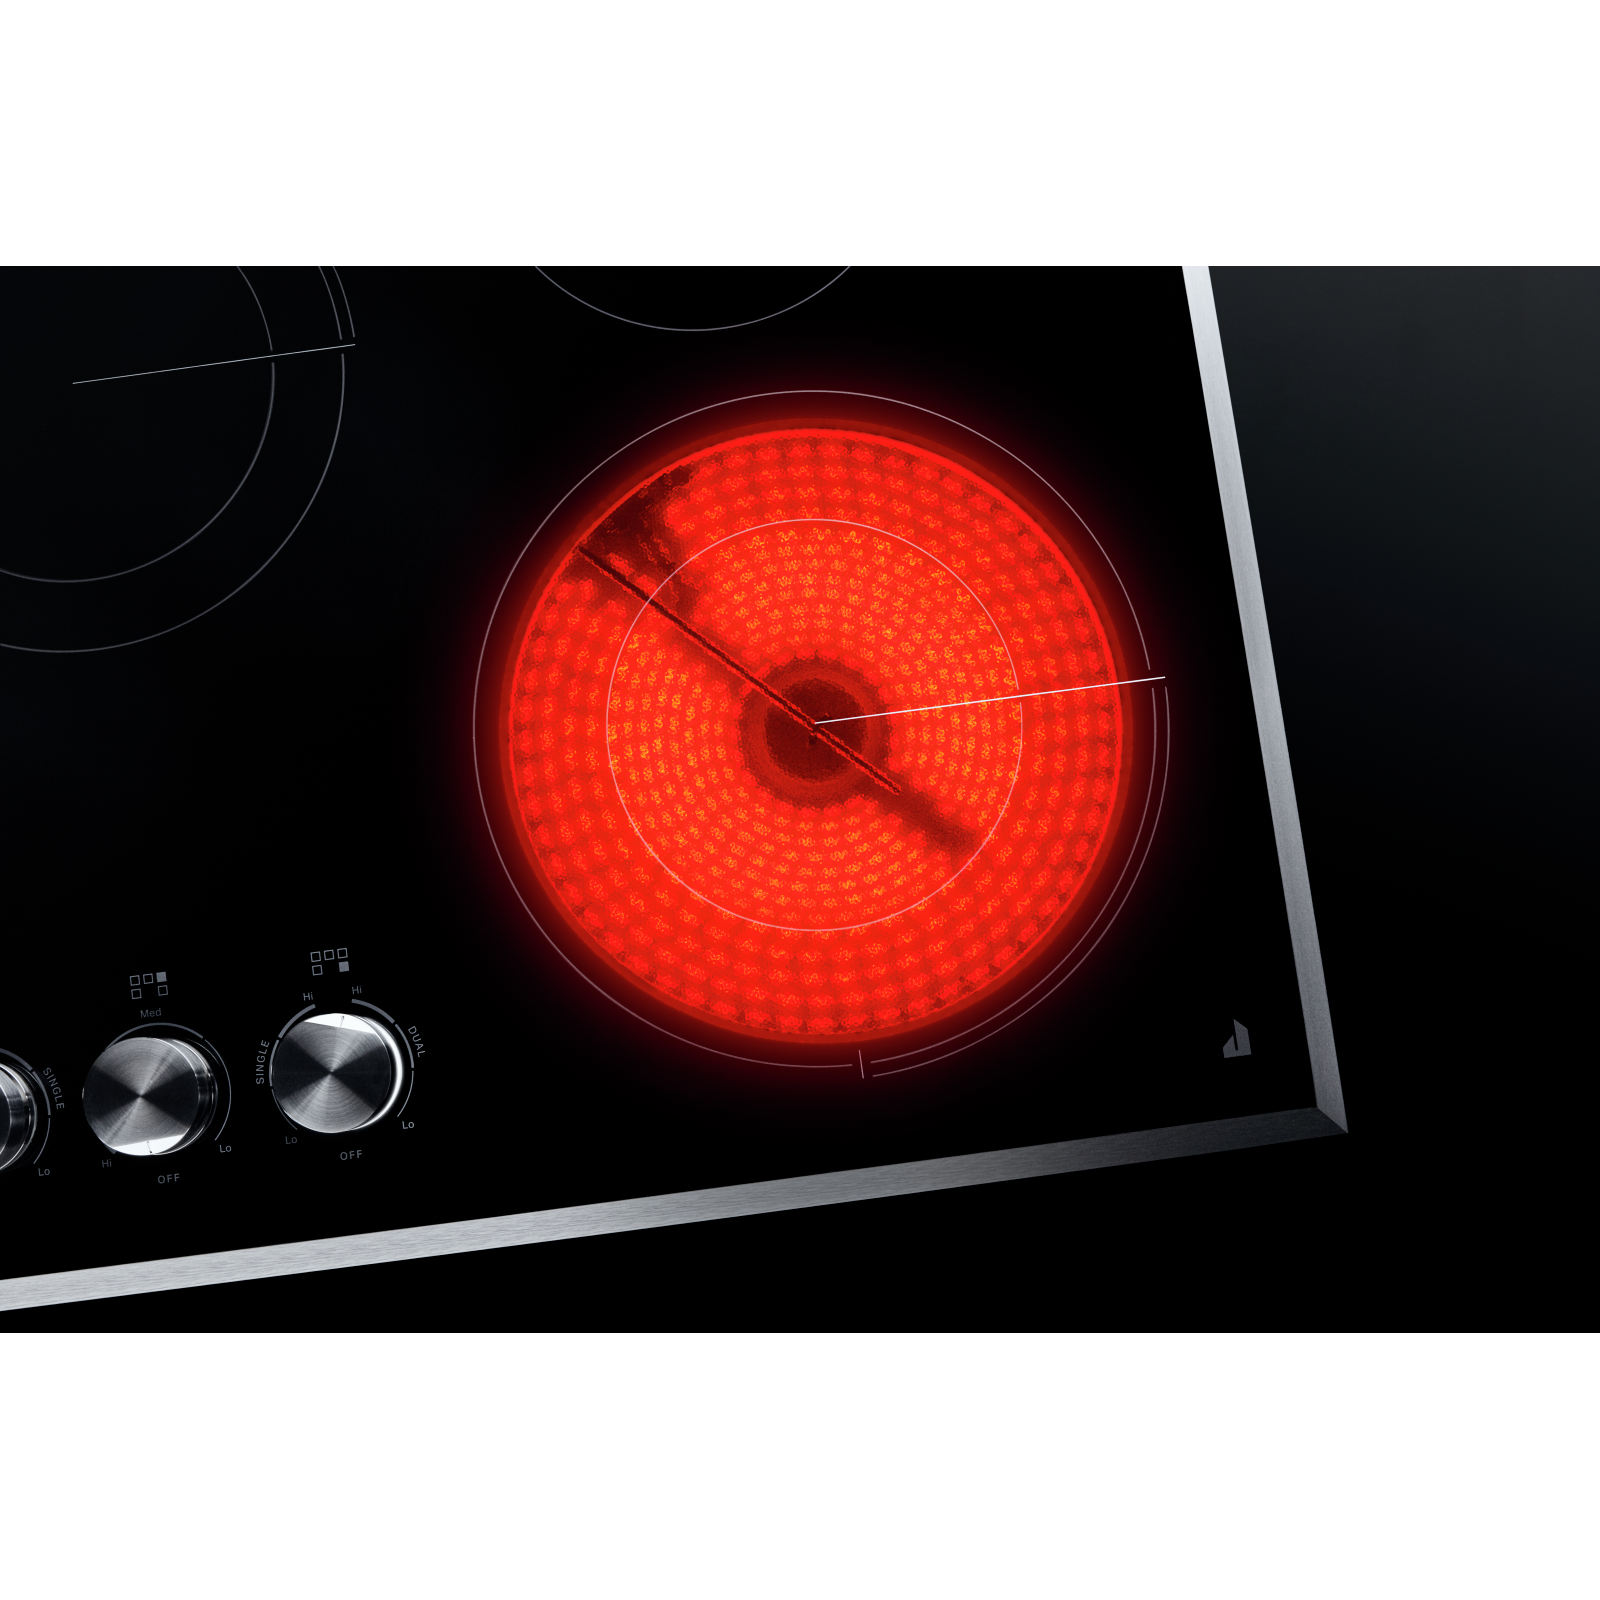 JennAir - 36.3125 inch wide Electric Cooktop in Black - JEC3536HB